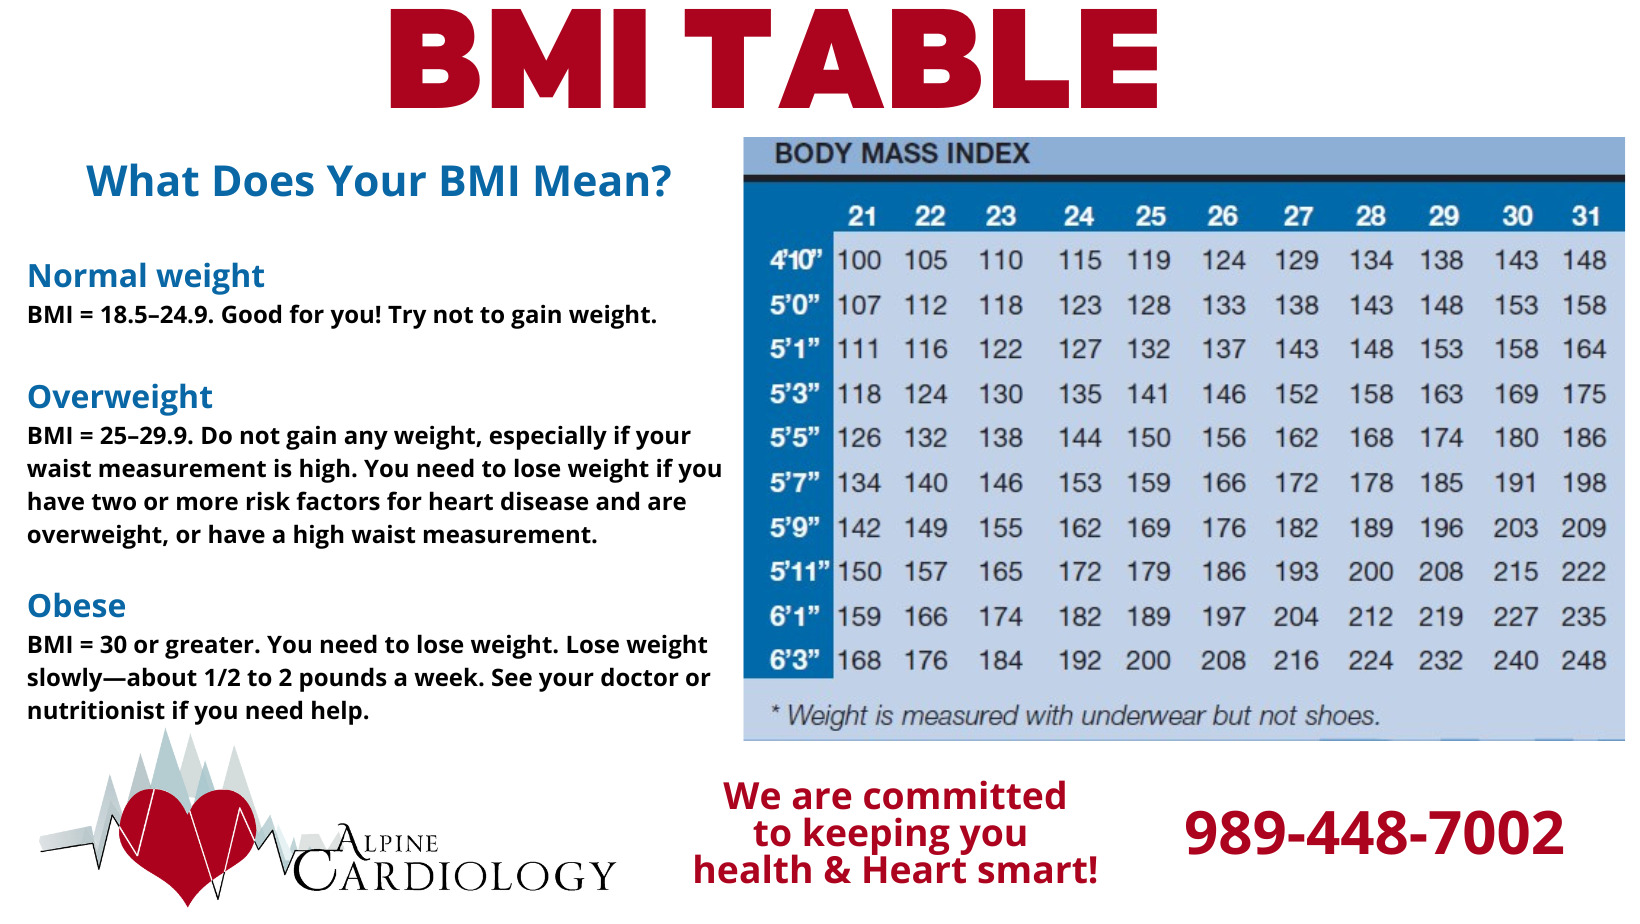 Our waistlines are expanding - but BMI isn't measuring up